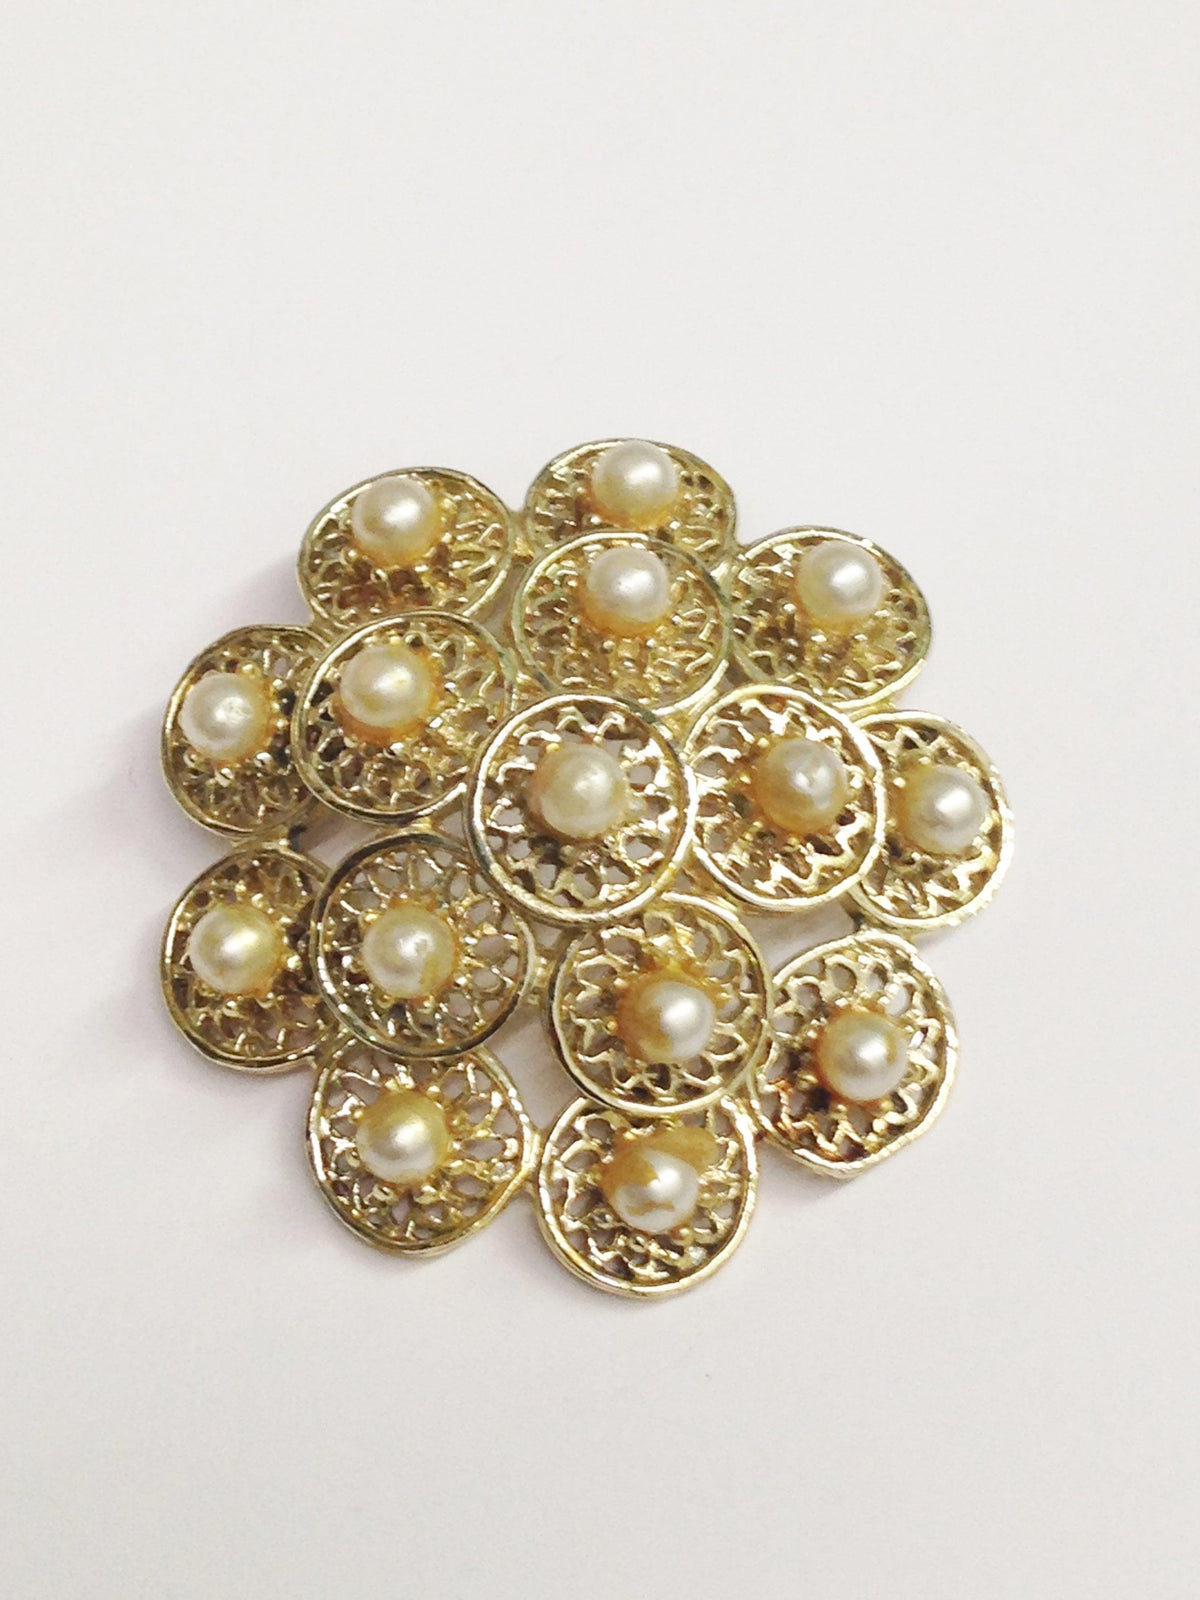 Vintage Florenza AB Rhinestone and Faux Pearl Brooch Pin – Hers